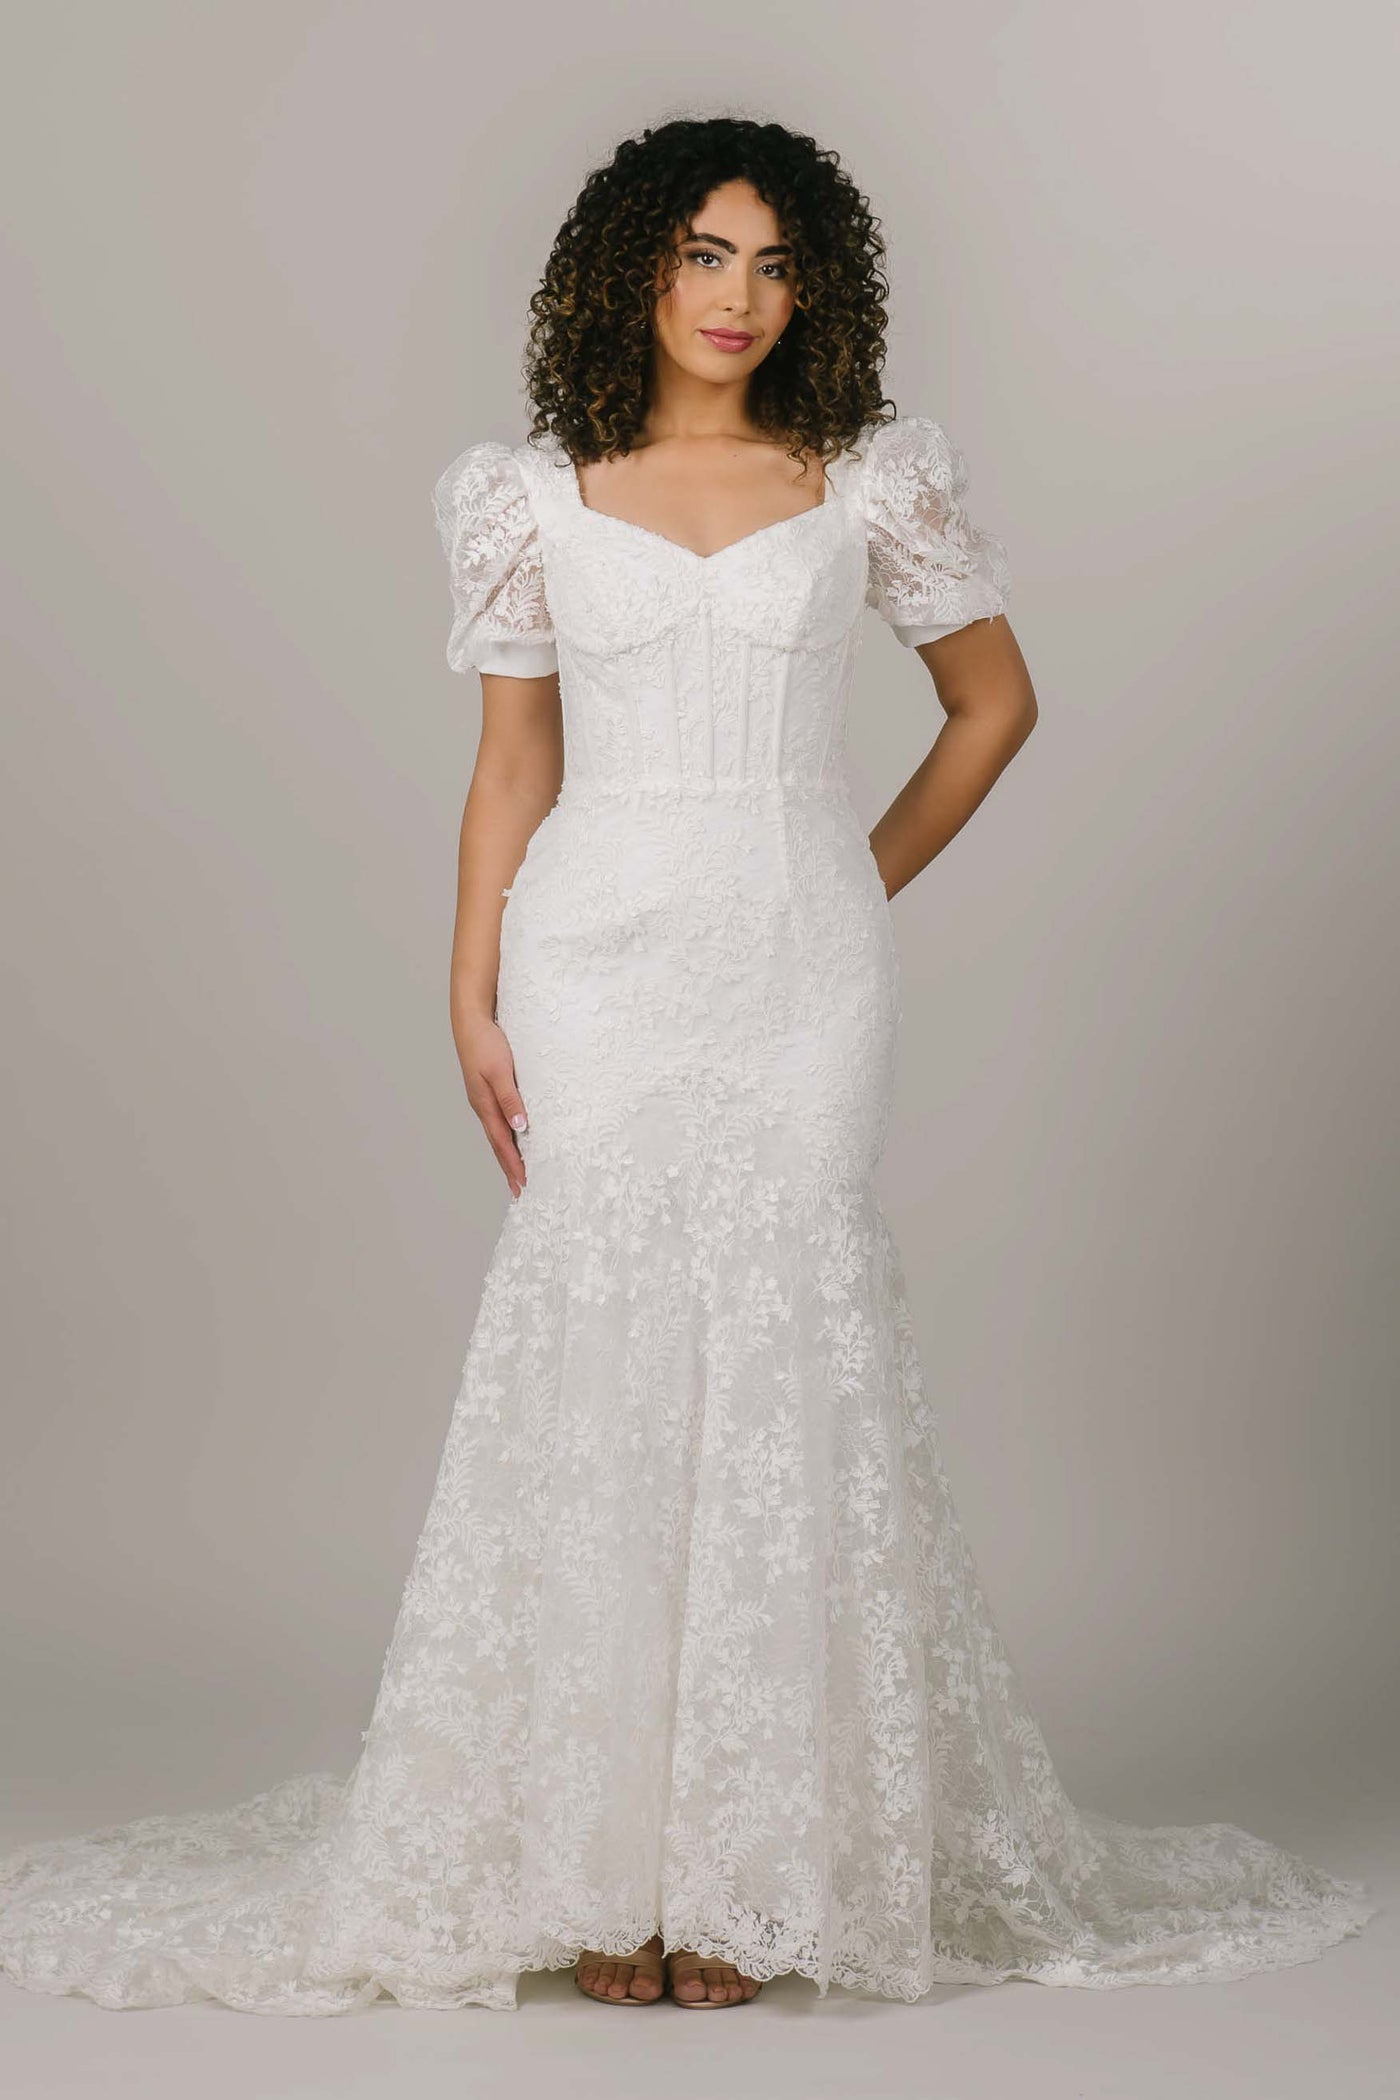 This is a front shot of a modest wedding dress with a sweetheart neckline and boning along the bodice.